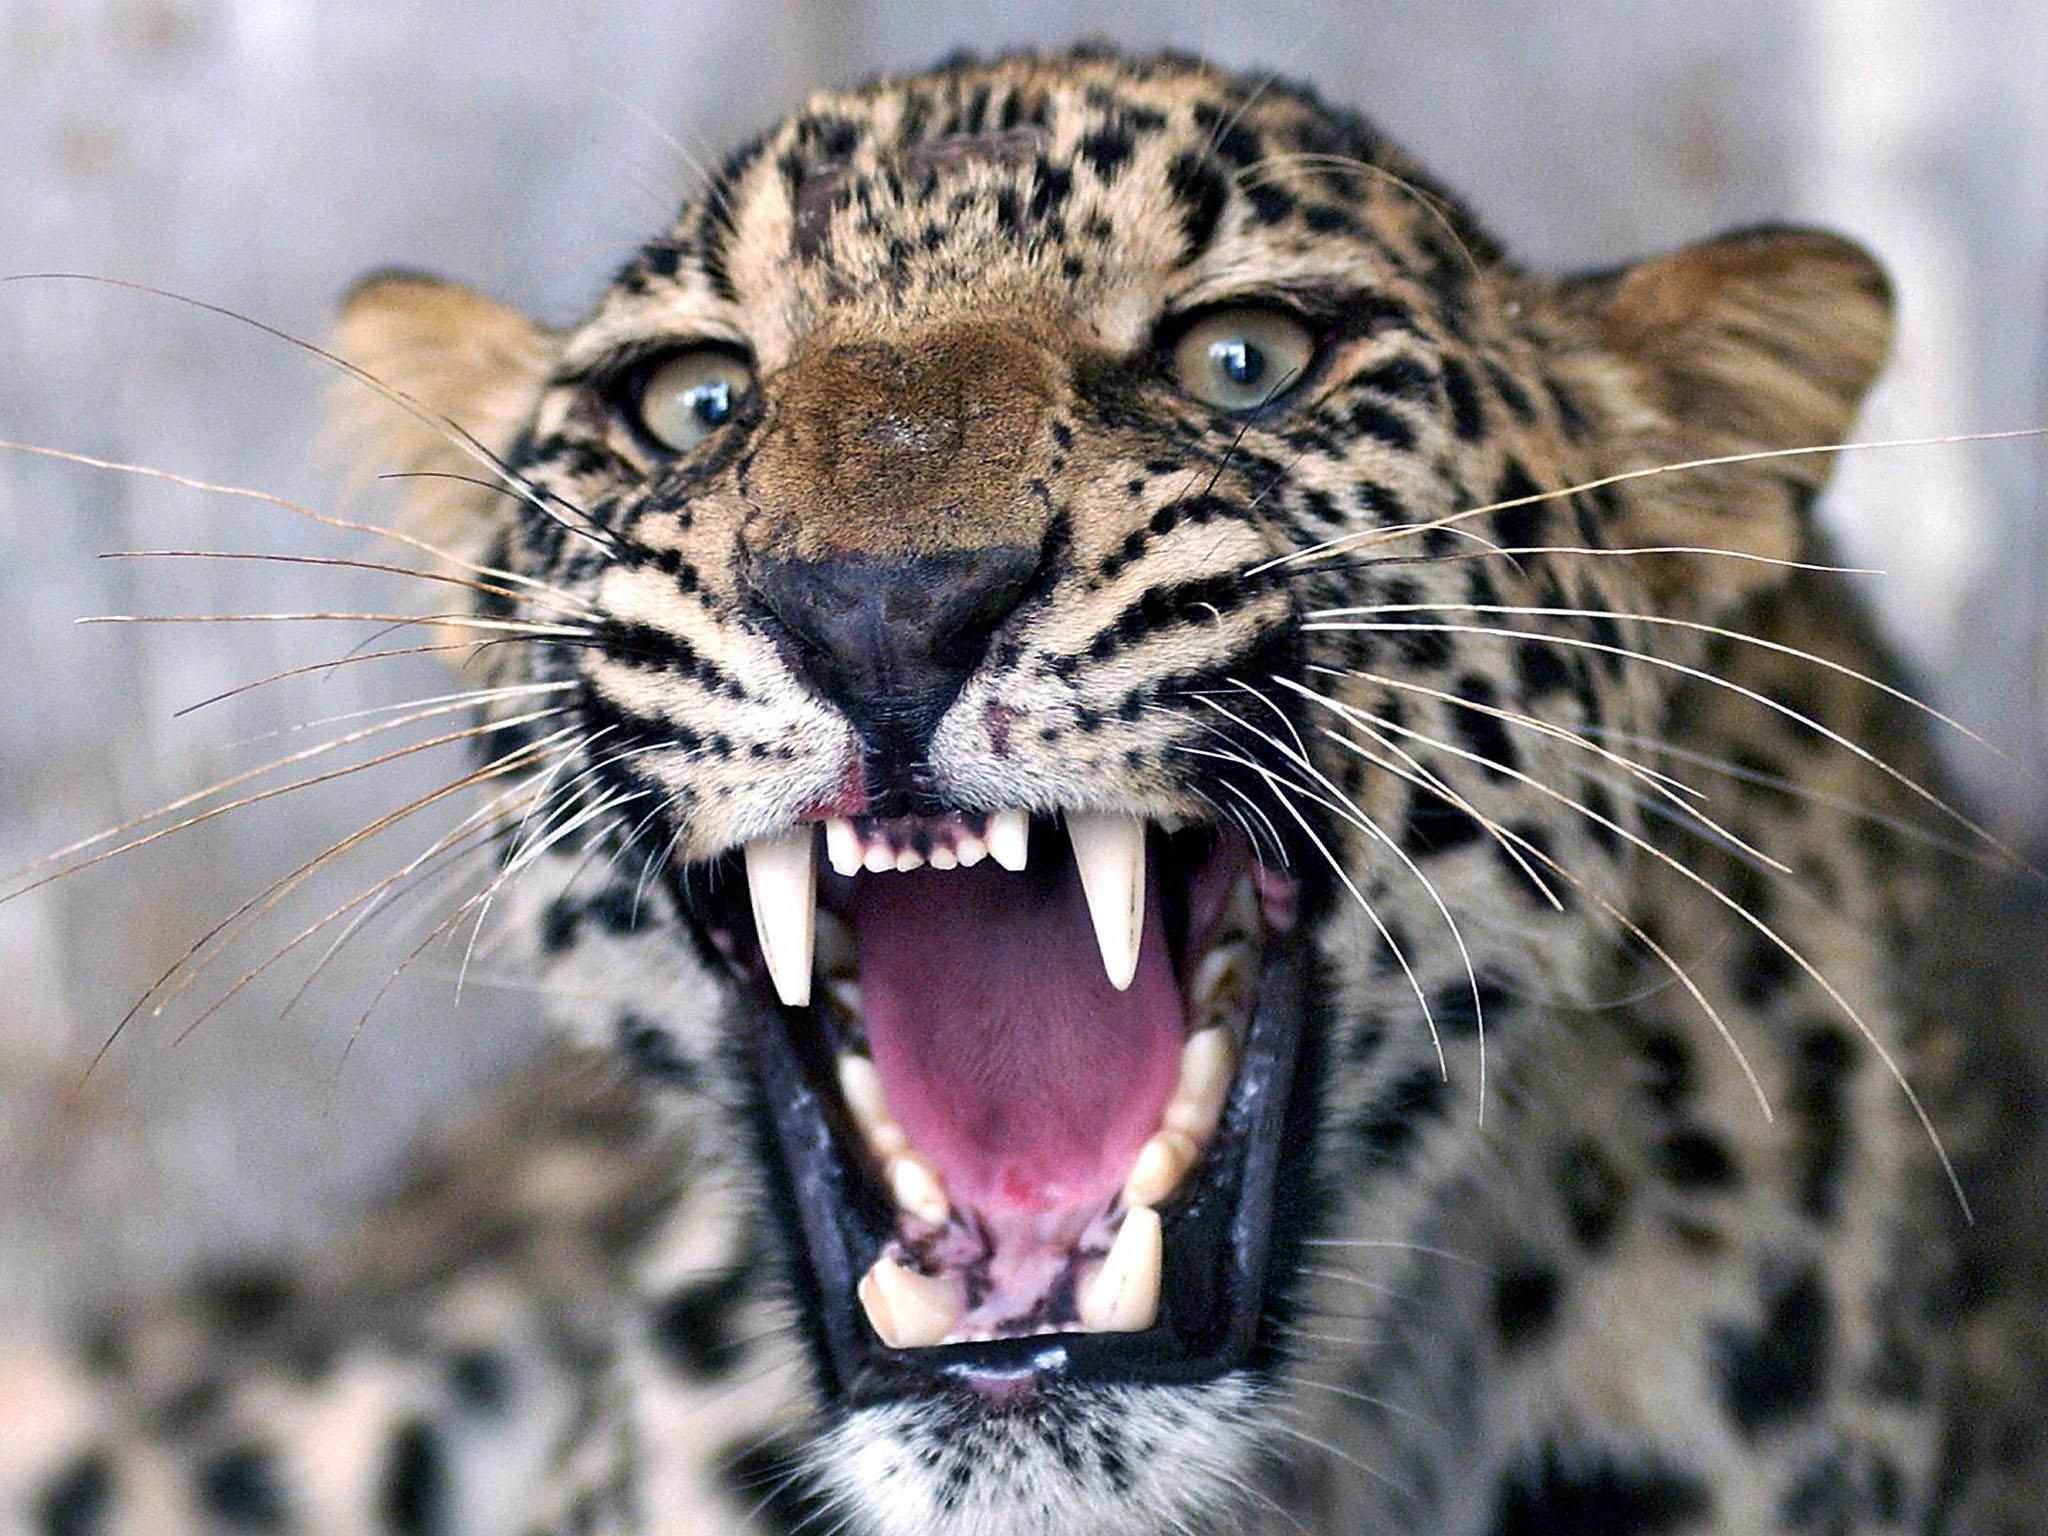 ‘The hunt is on with the intention of capturing the leopard and removing it from the wild,’ said a spokesman